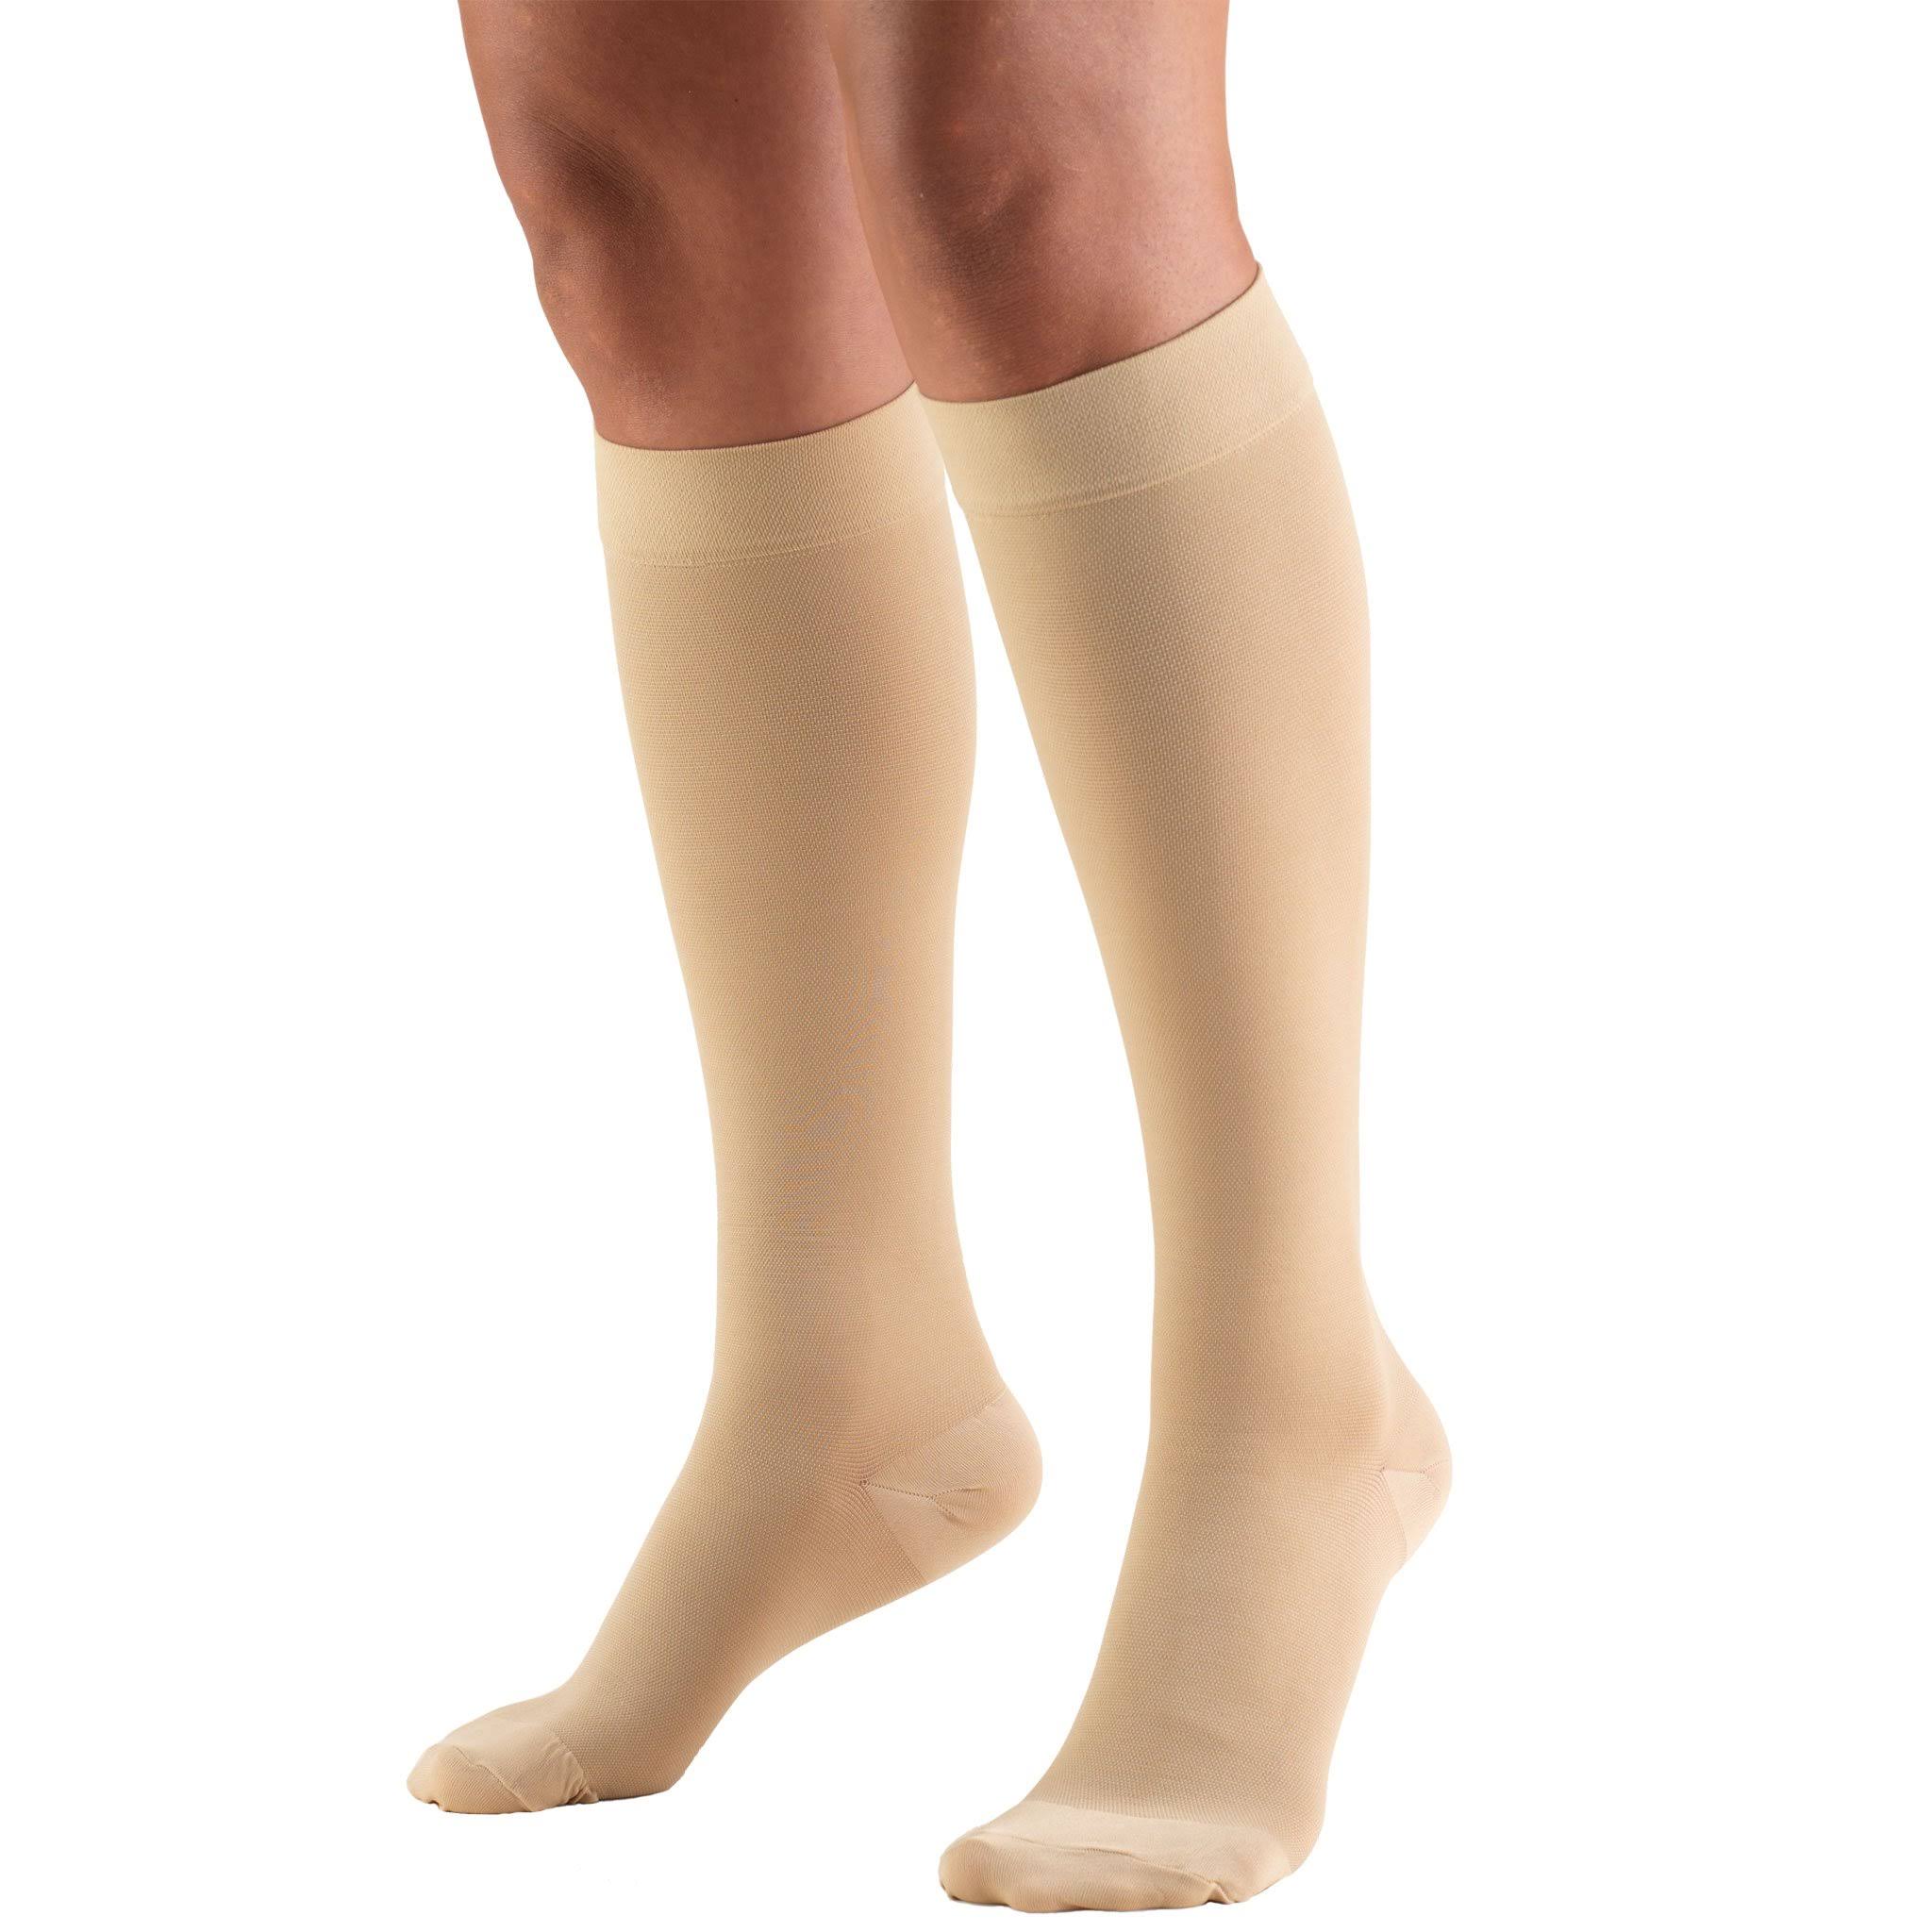 Truform 20-30 mmHg Compression Stockings for Men and Women, Knee High Length, Closed Toe